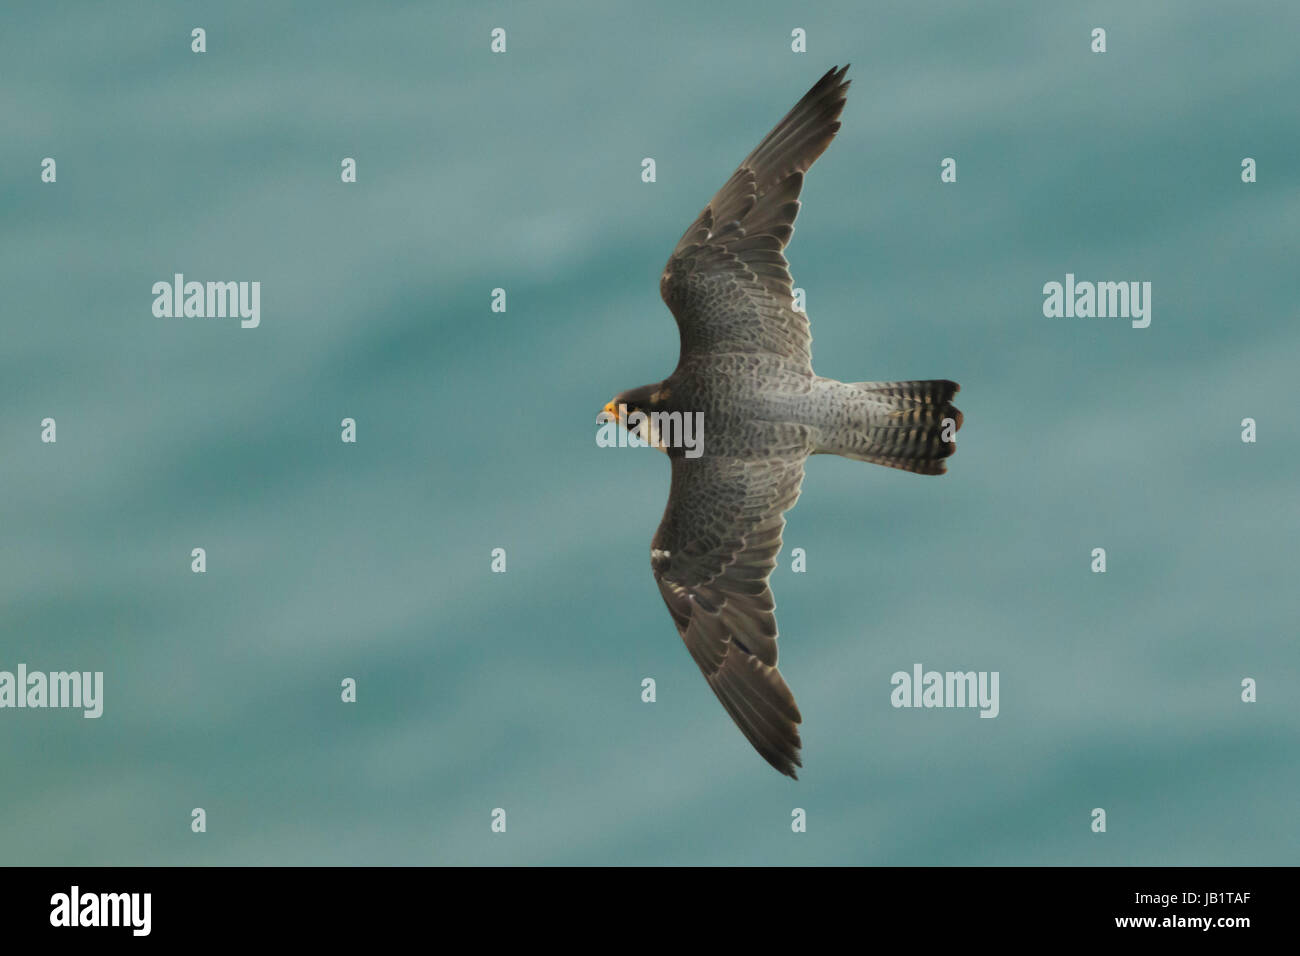 Adult Peregrine falcon (Falco peregrinus) flying over the blue sea and seen from above Stock Photo